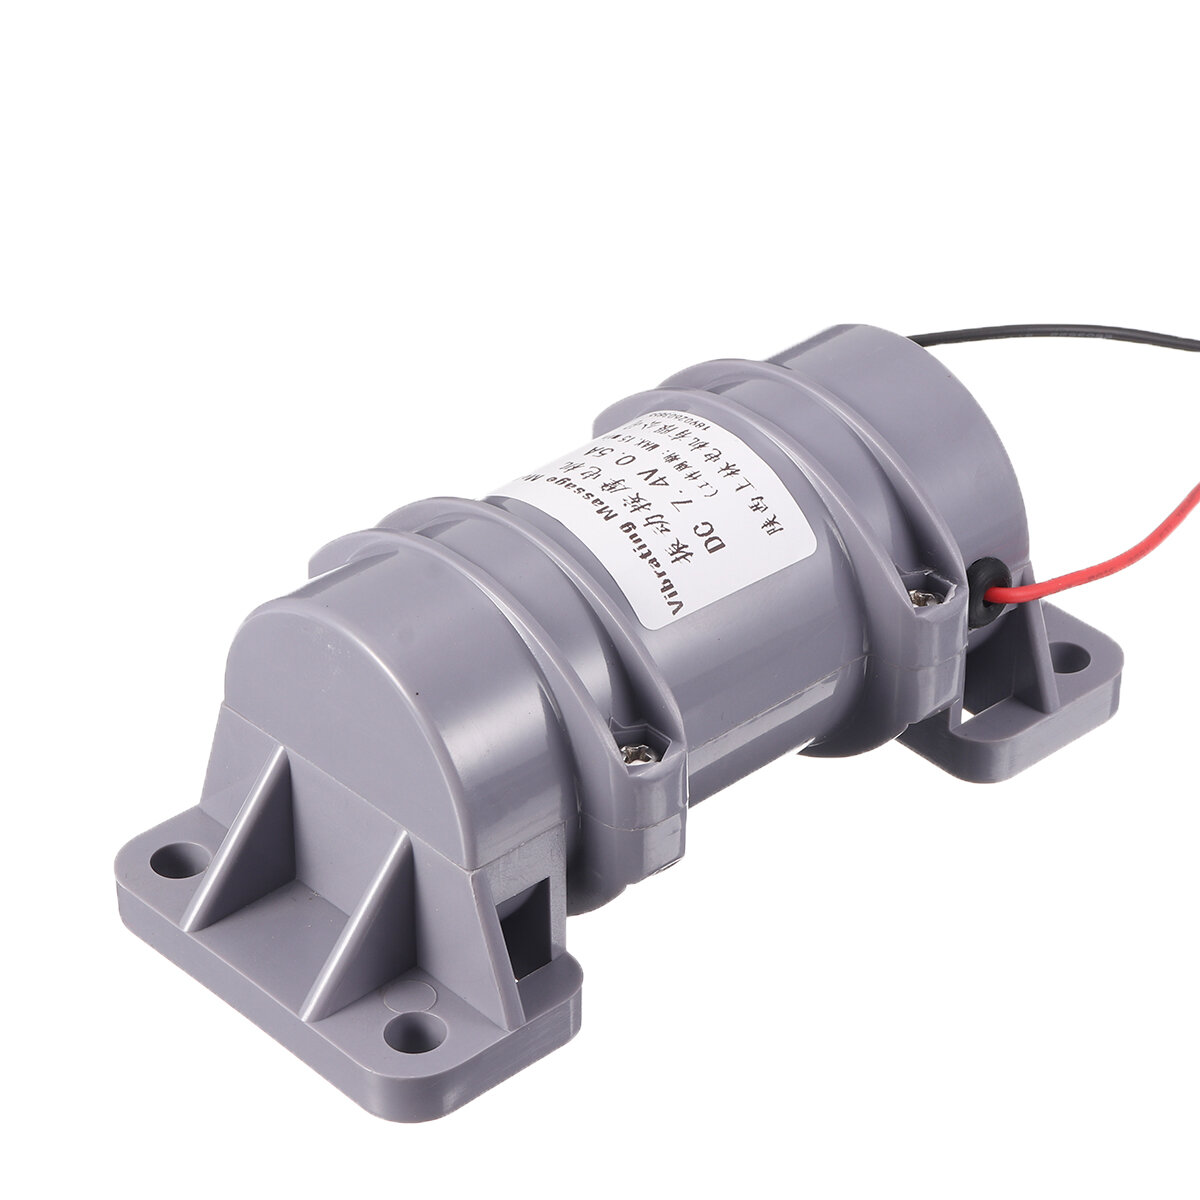 DC 7.4/12/24V 3000rpm Plastic Industry Mini Vibration Motor Rotary Speed Vibrating Motor For Massage Bed Chair Medical I